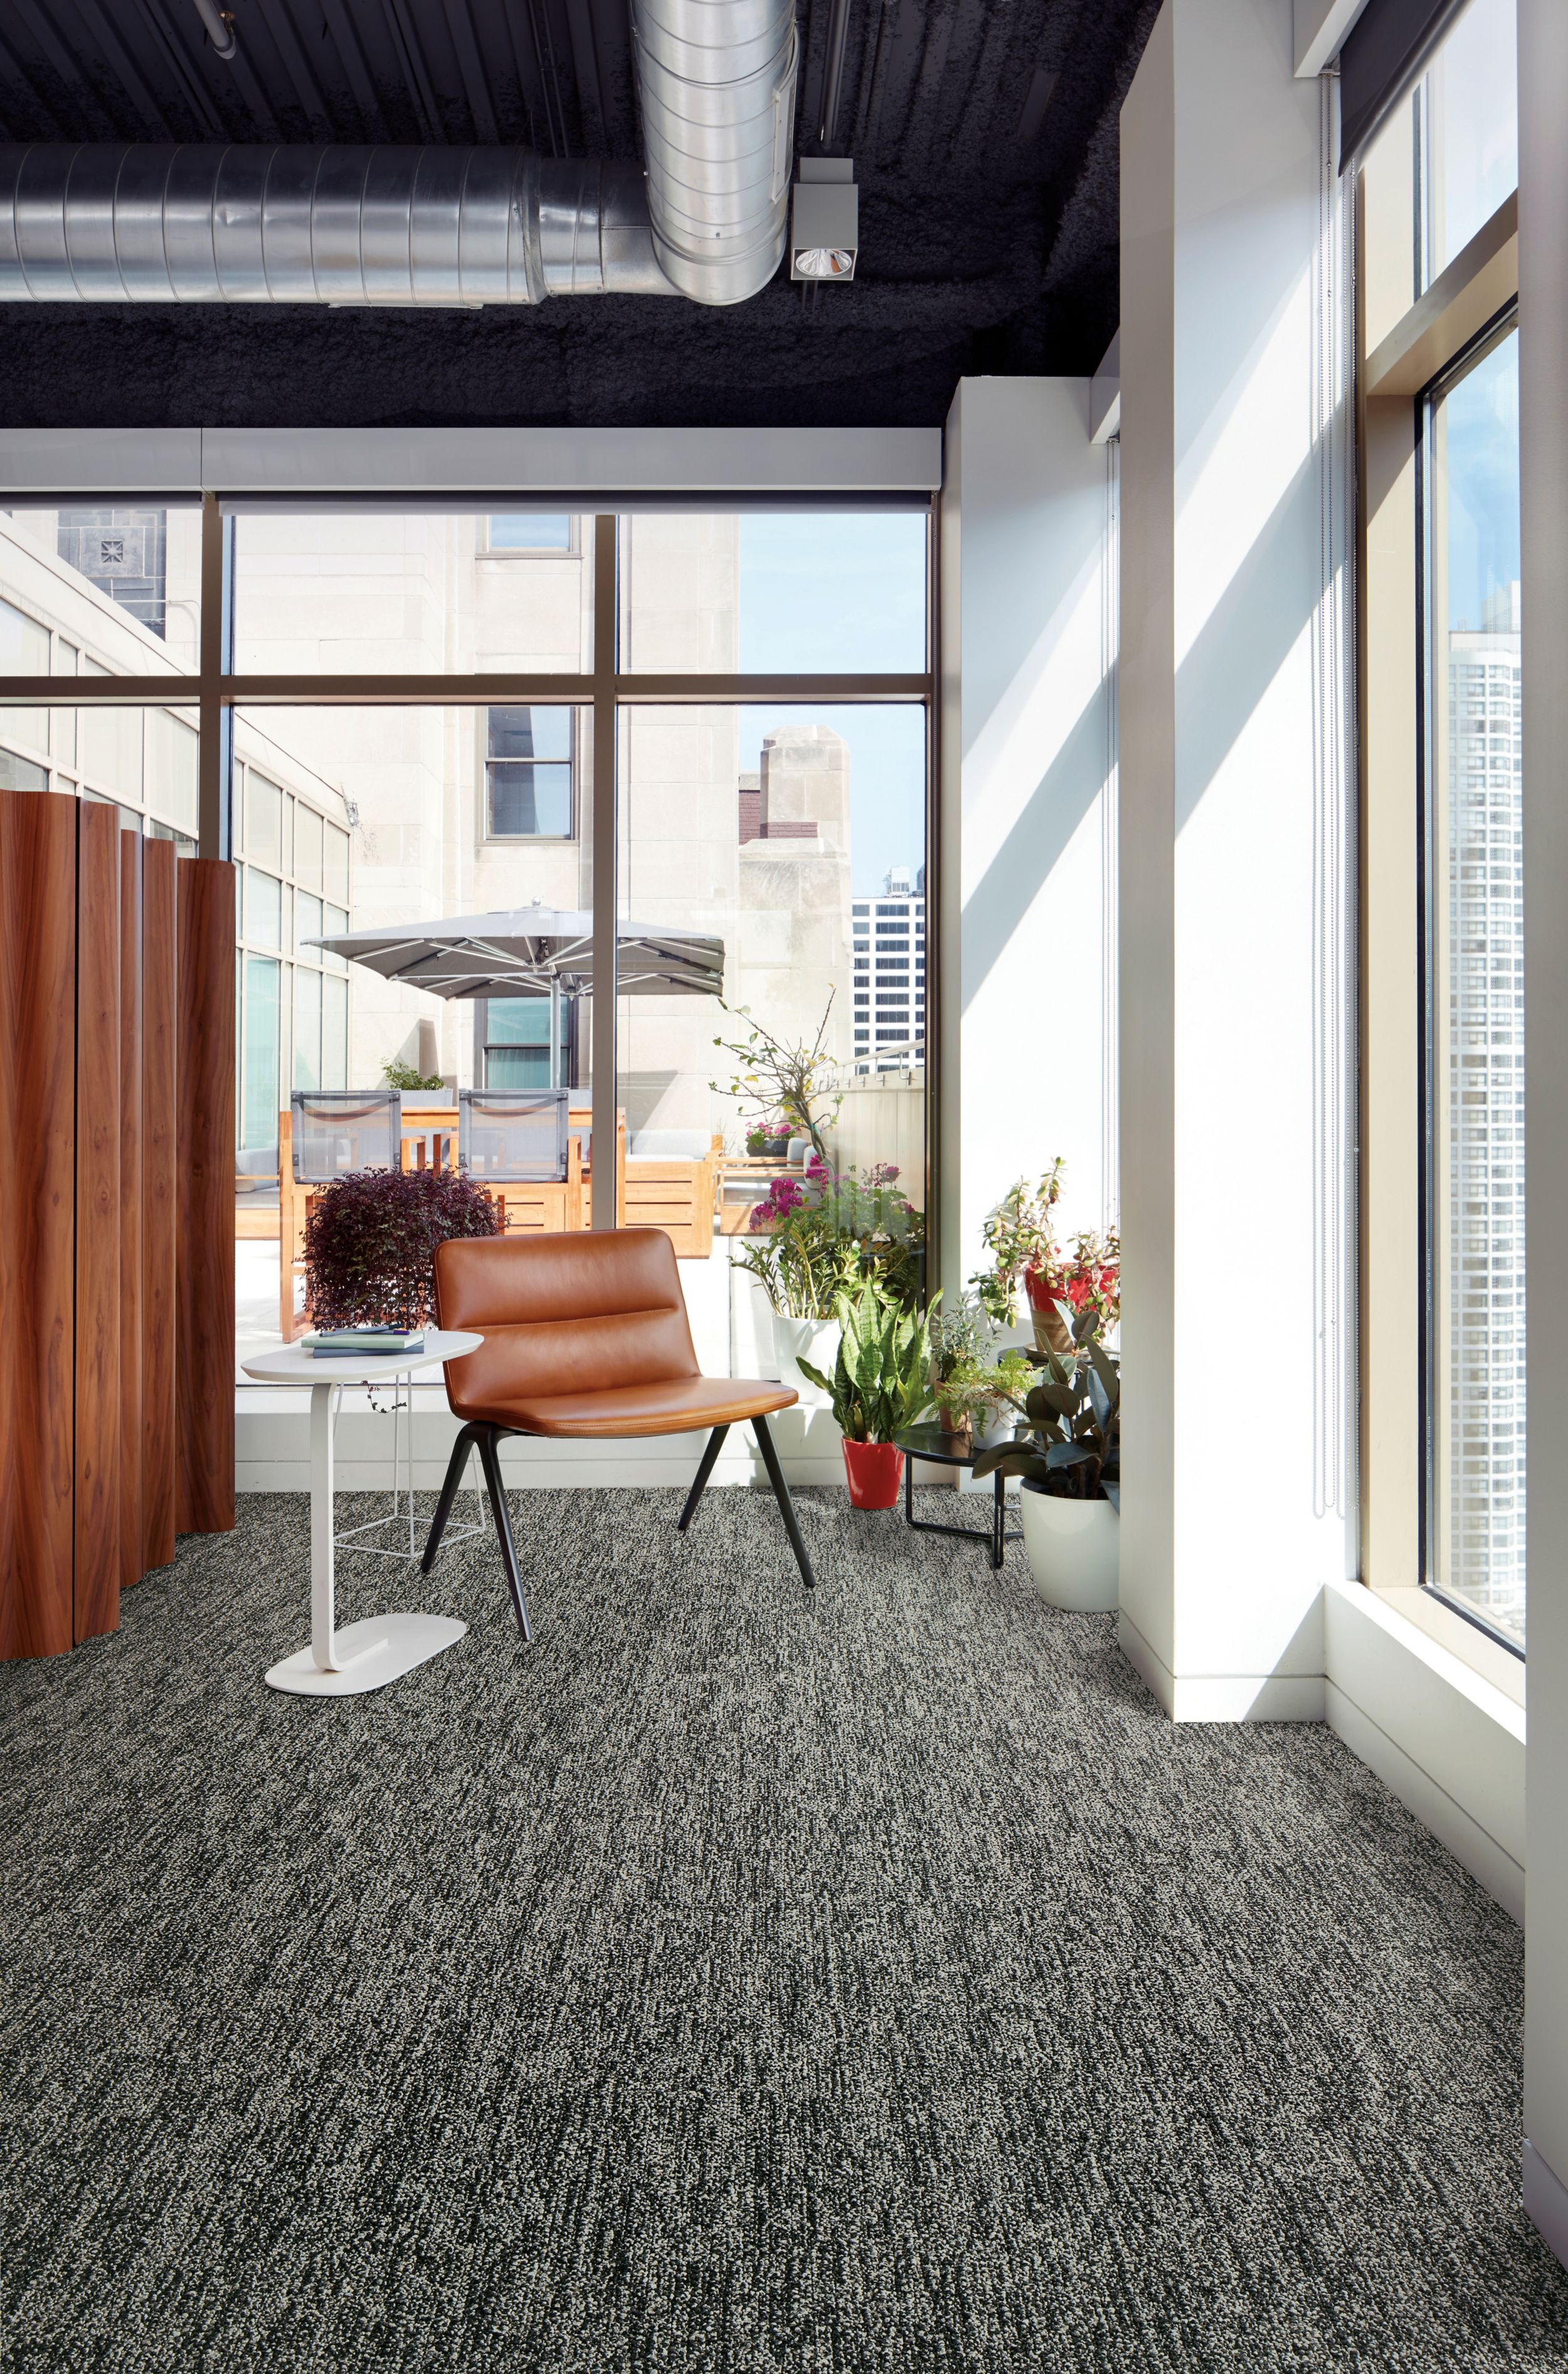 Interface Obligato plank carpet tile with leather chair and potted plants in windows imagen número 1